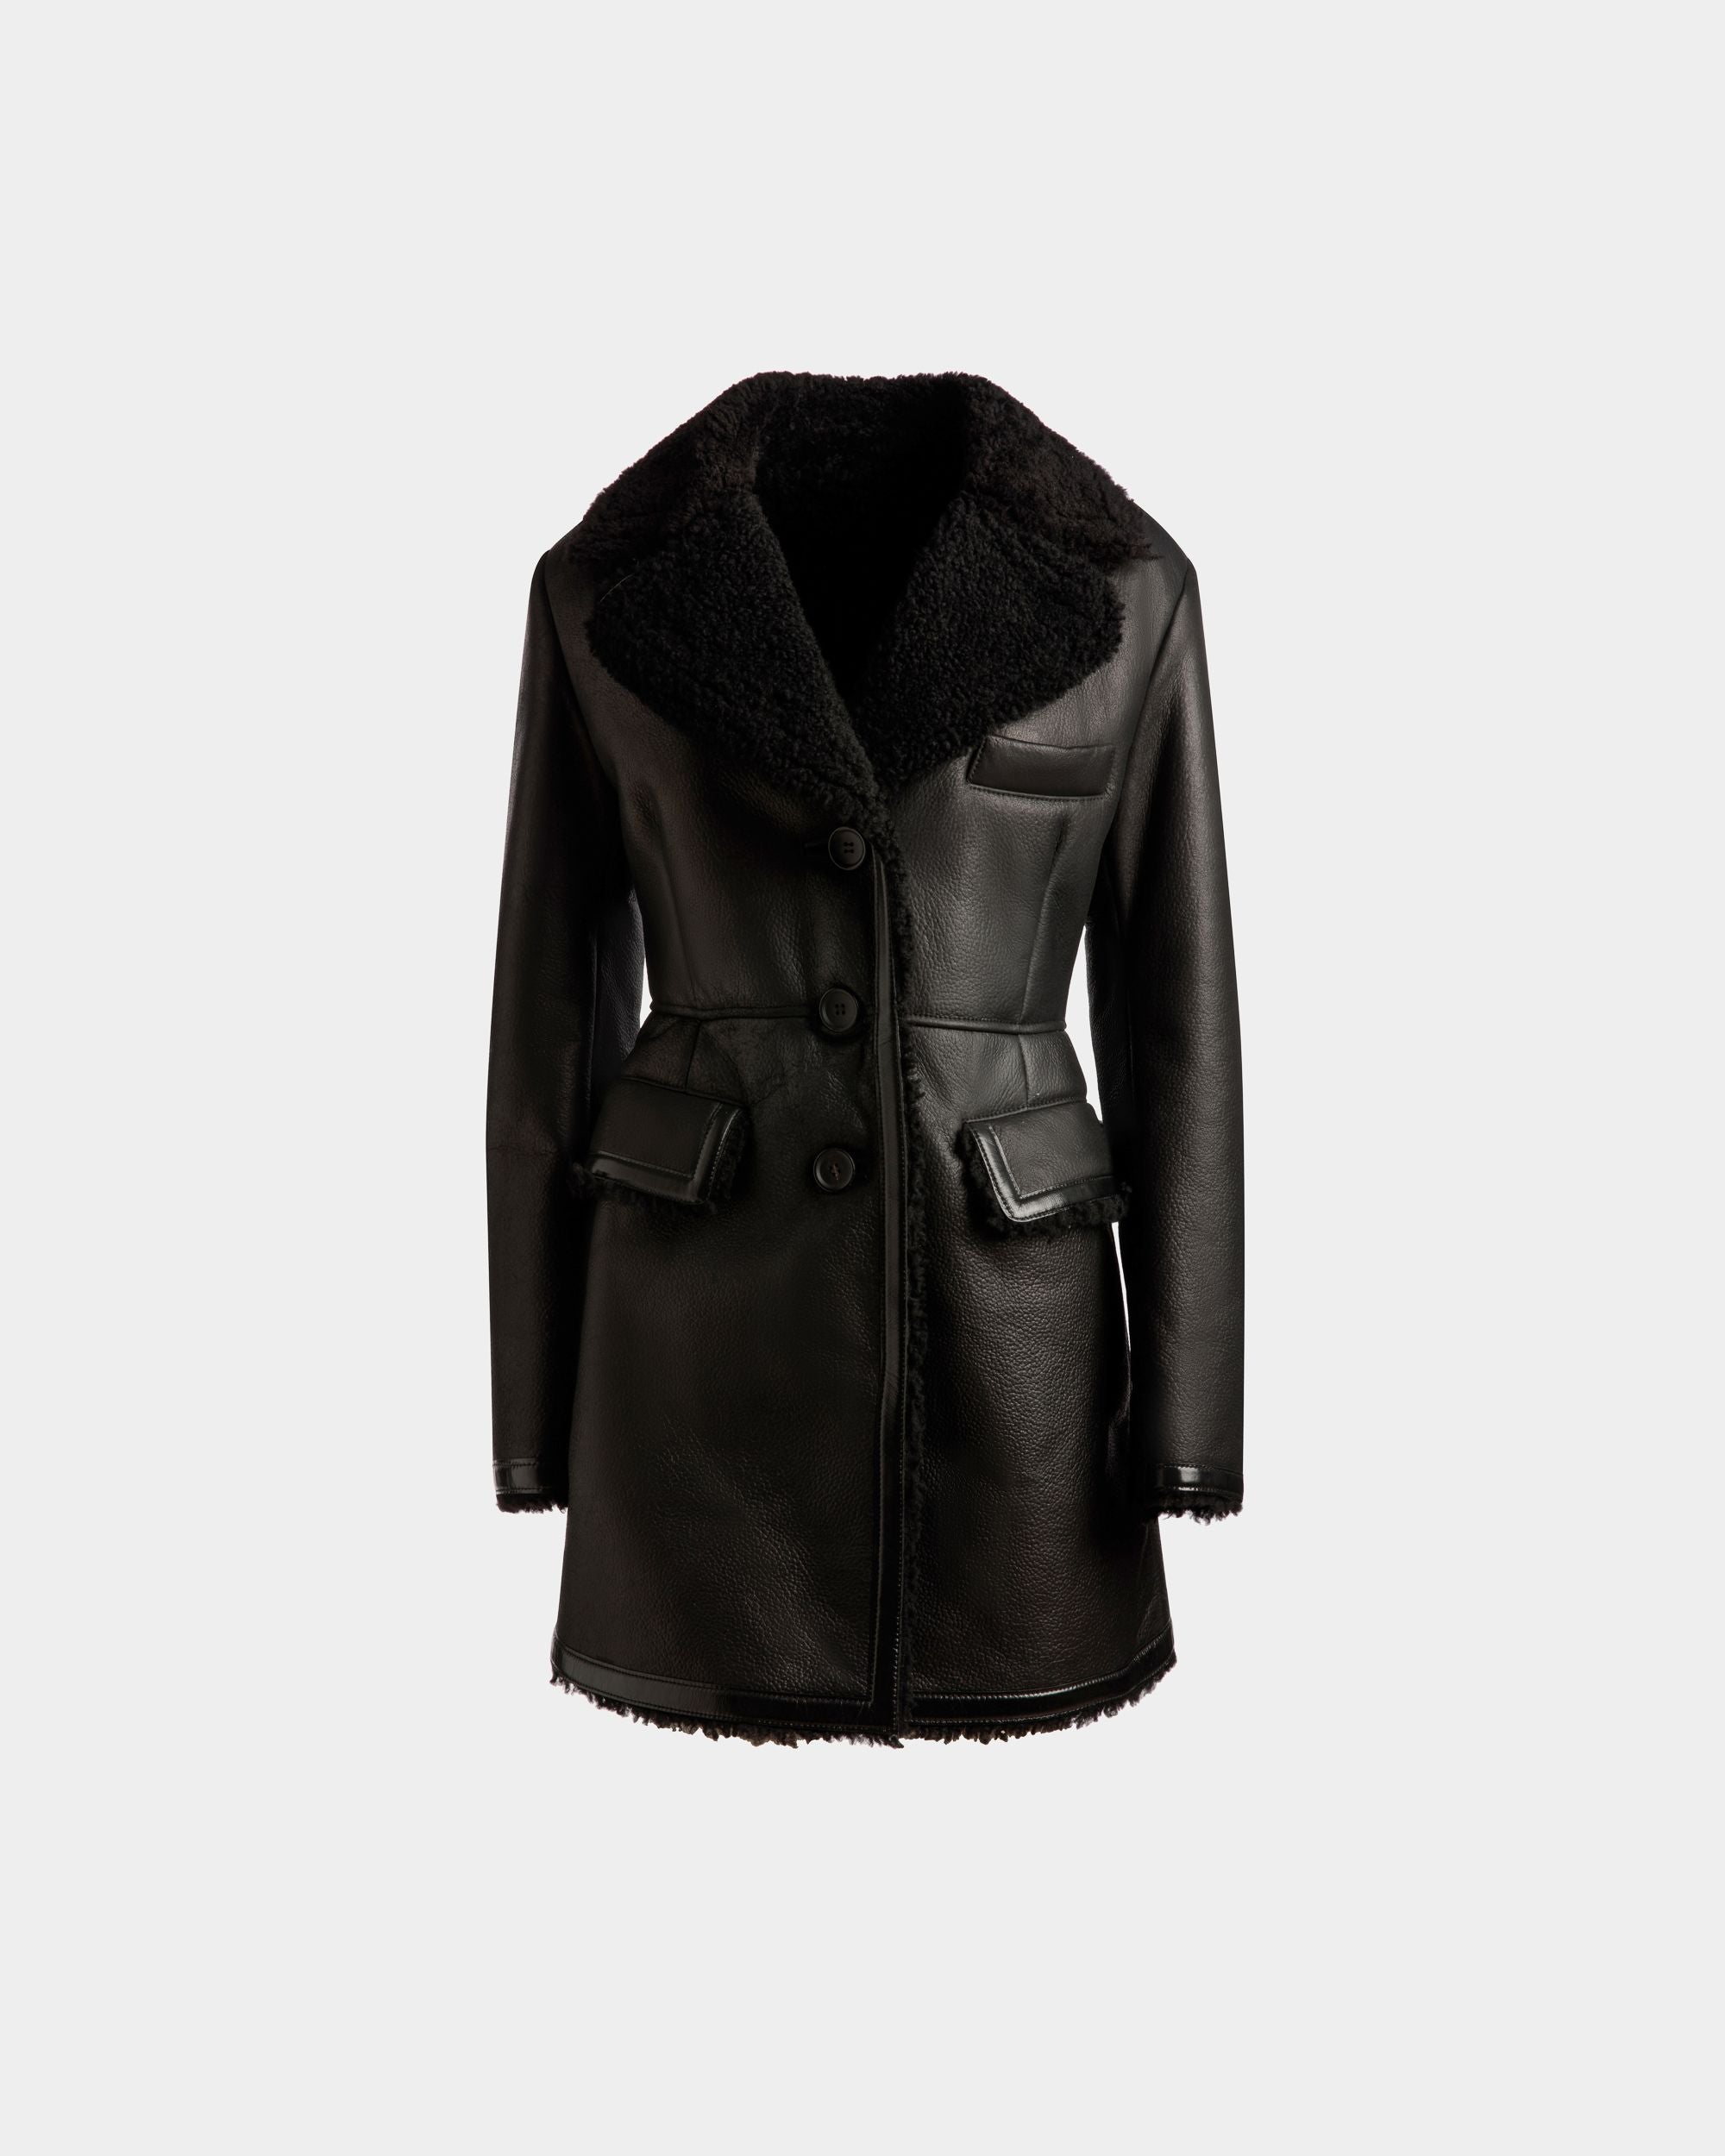 Wool-lined Coat | Women's Coat | Black Leather | Bally | Still Life Front